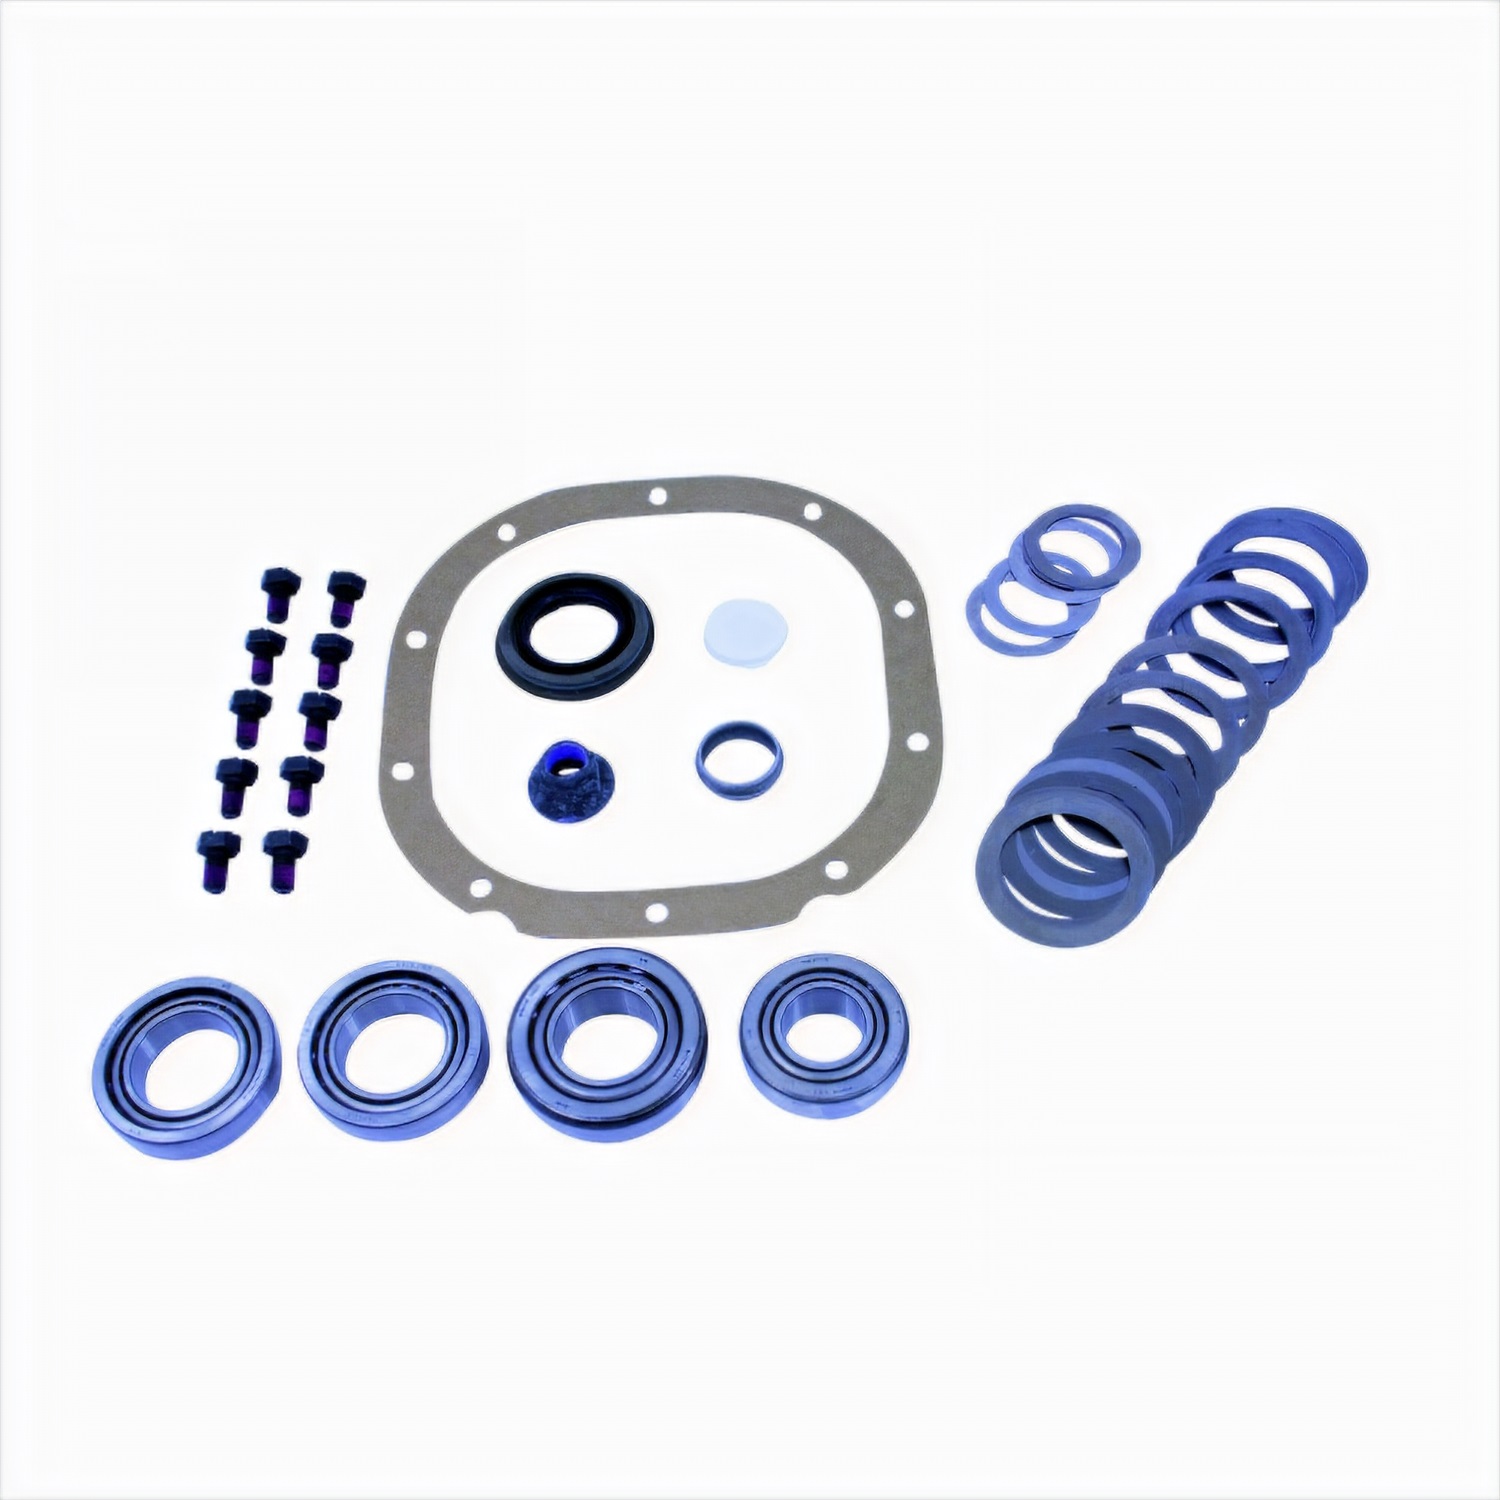 Ford Racing Ford Racing M-4210-C3 8.8 in. Ring And Pinion Installation Kit